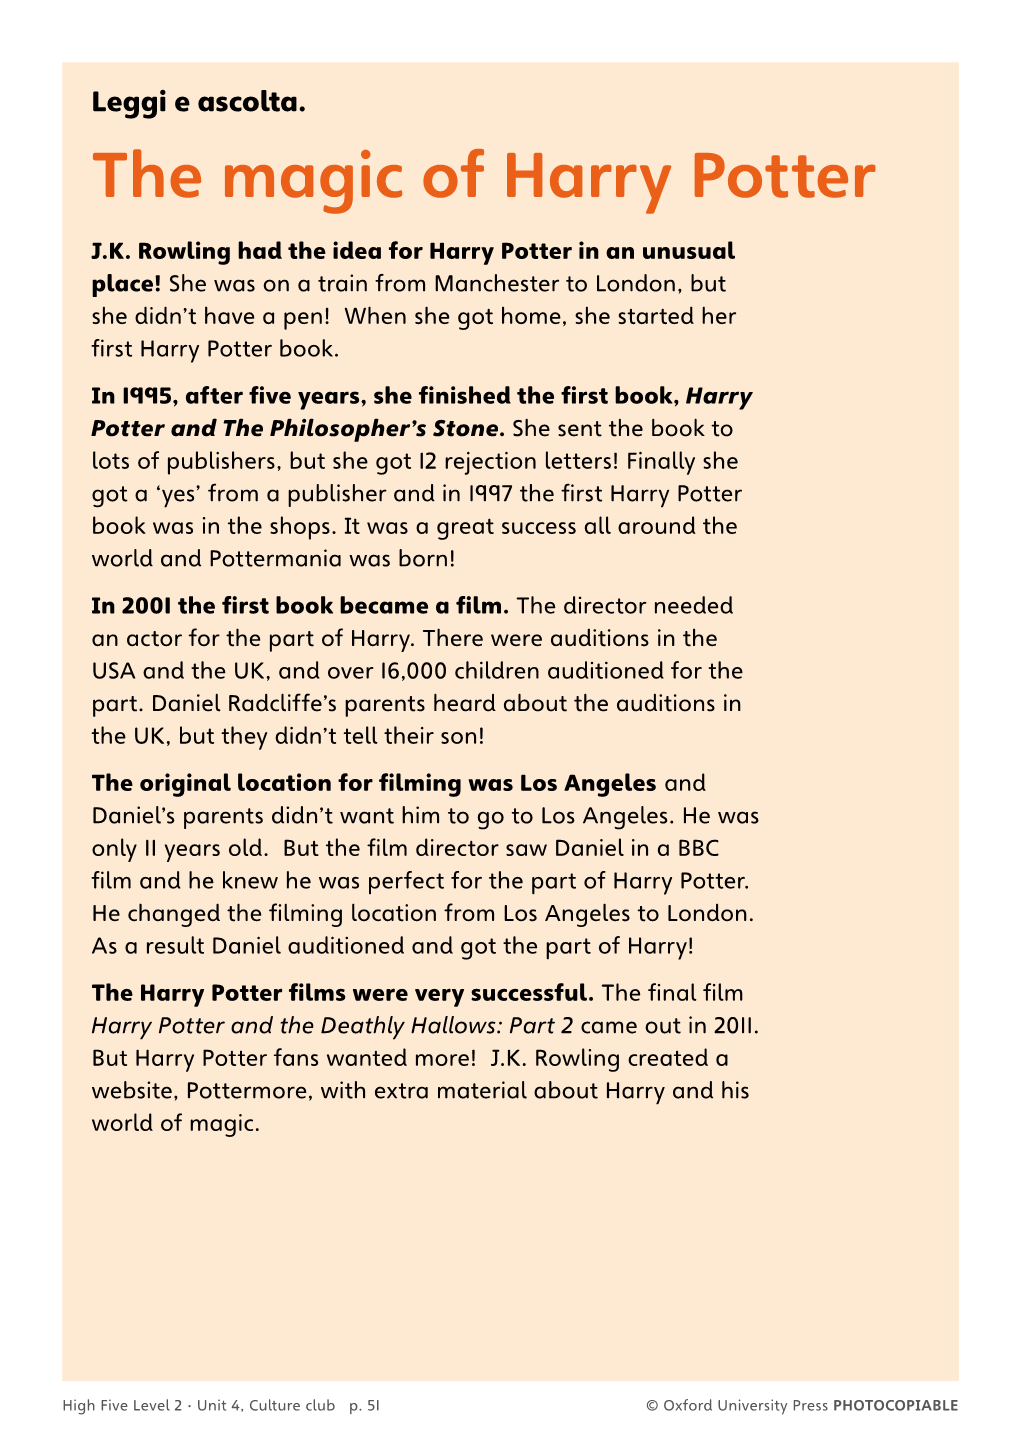 The Magic of Harry Potter